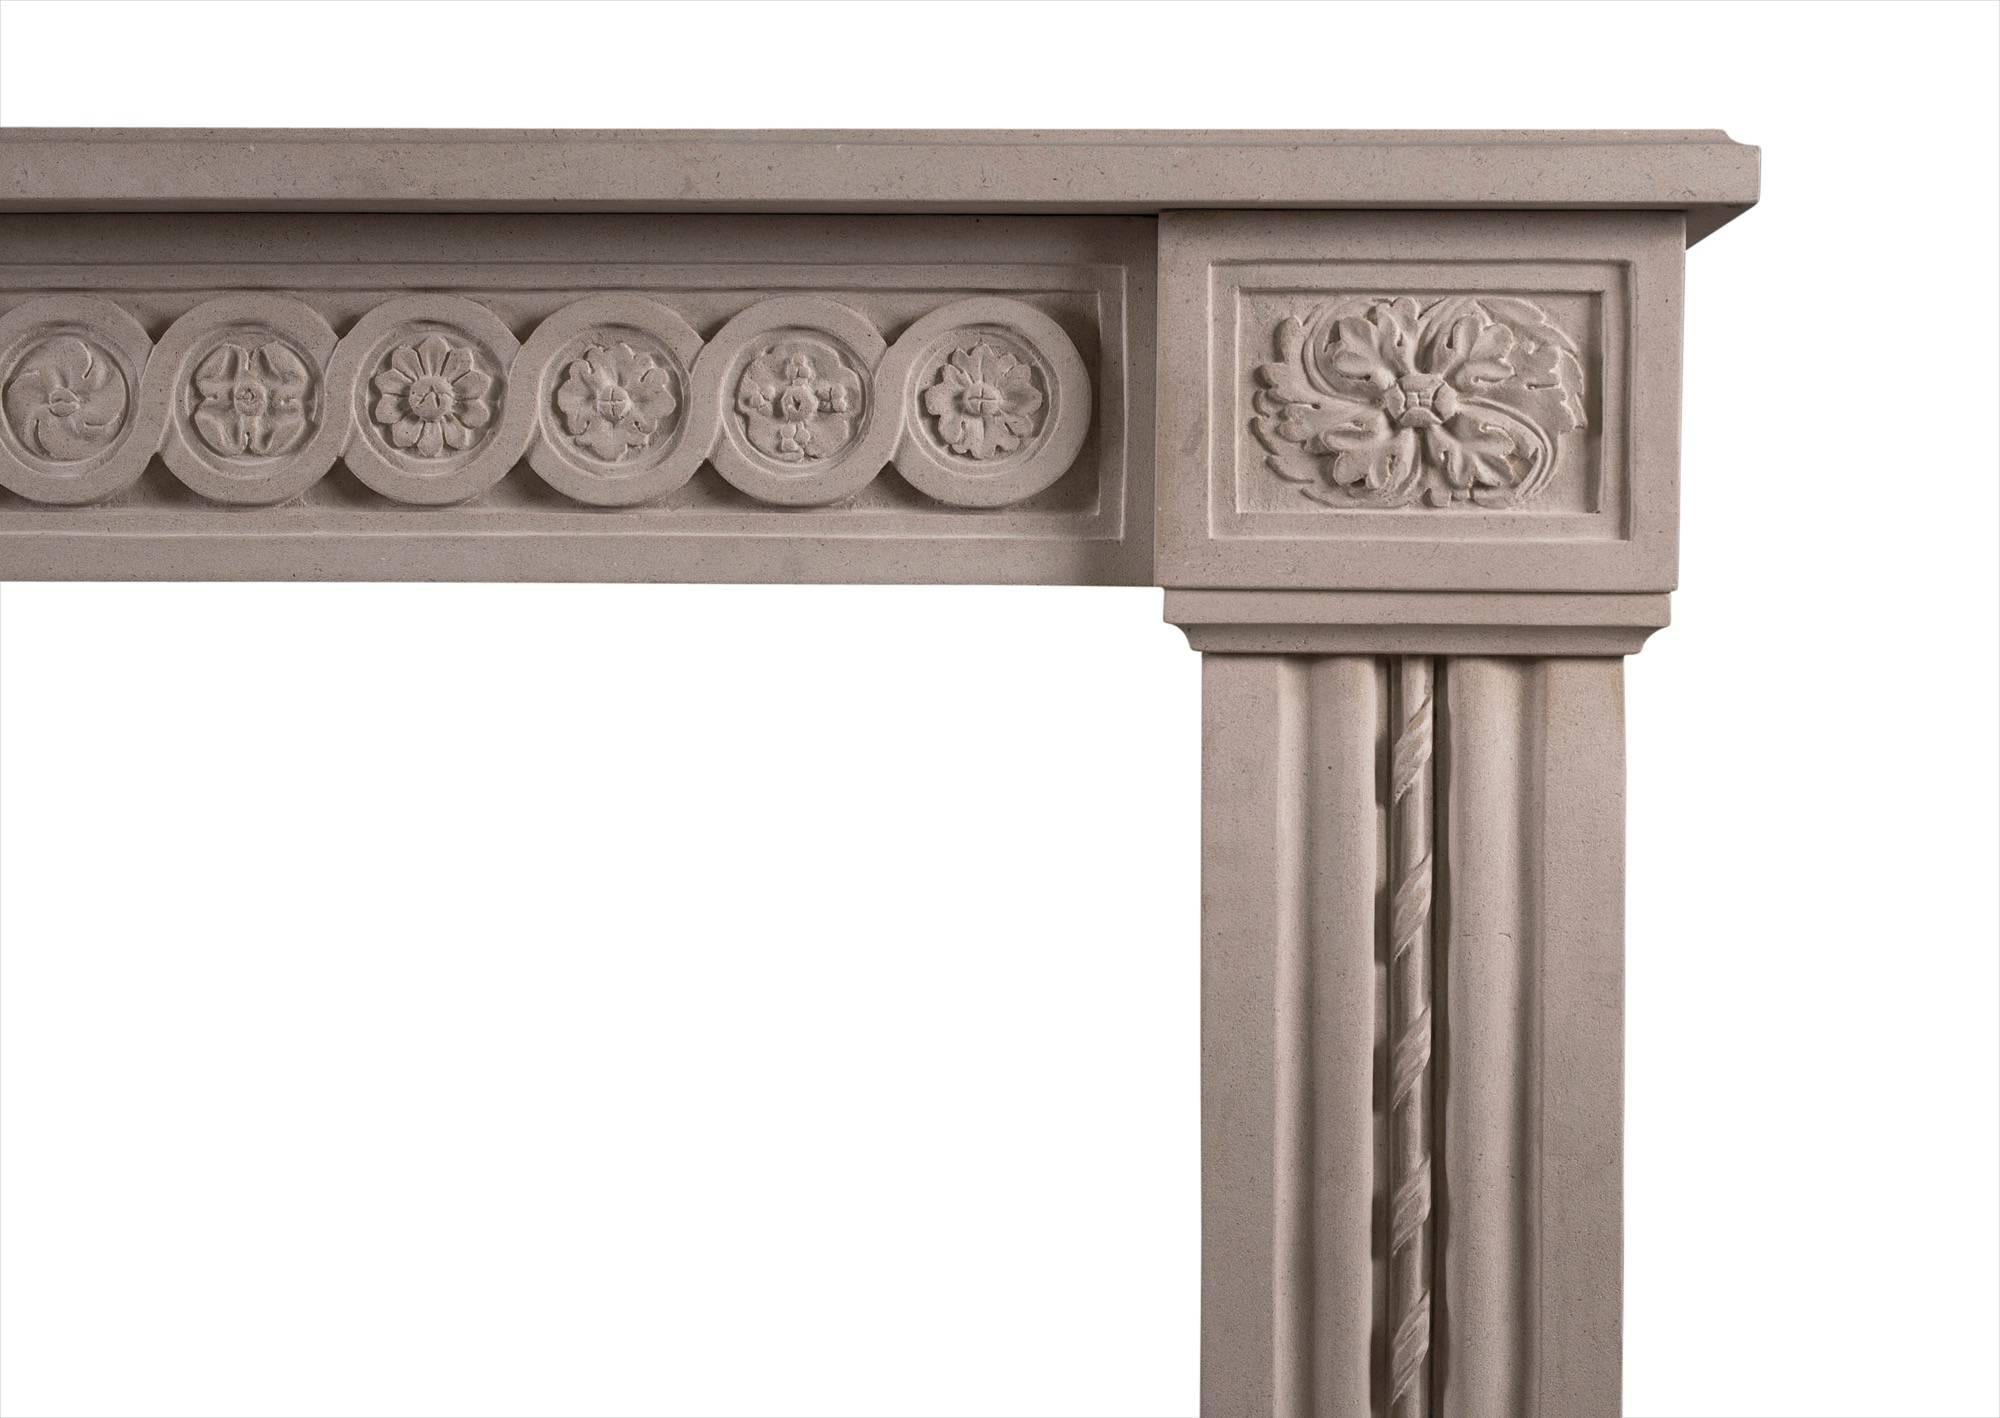 A well-proportioned French Louis XVI style fireplace carved in Portland stone. The carved frieze of guilloche and paterae, shaped jambs of reeded form with carved rope moulding, surmounted by oval pateras. A copy of an 18th century original.

Shelf